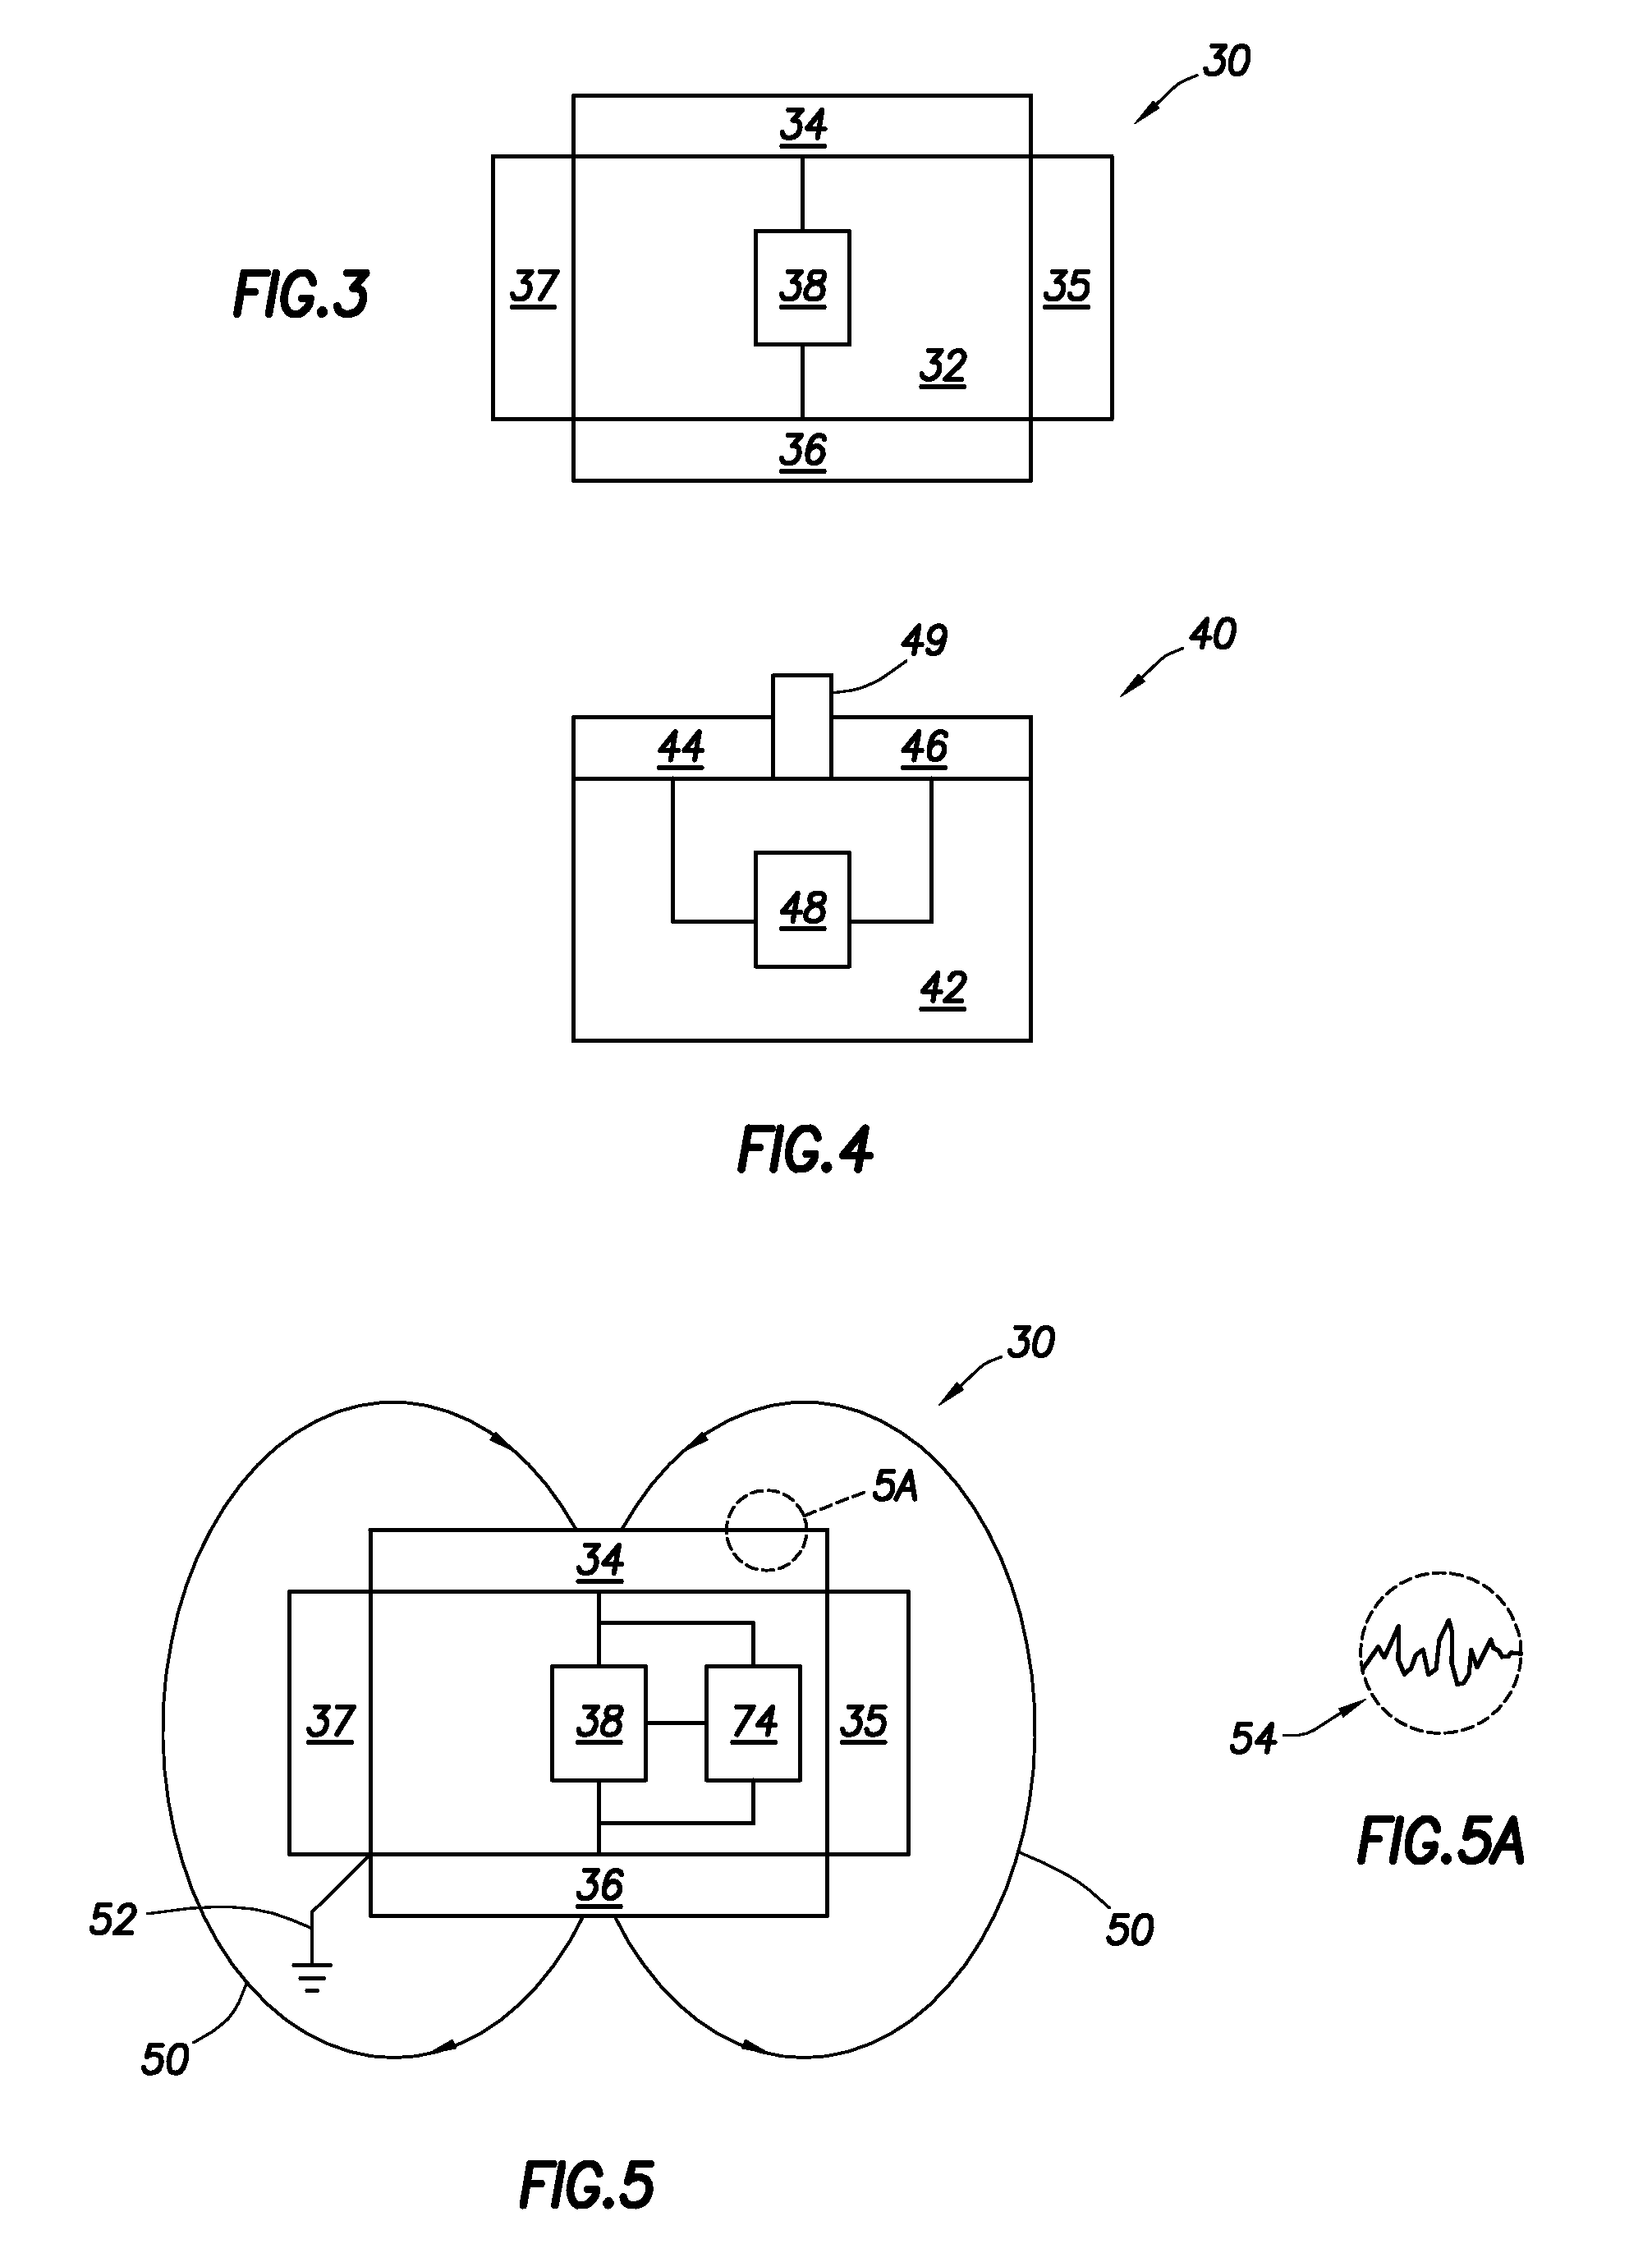 Communication System Using an Implantable Device